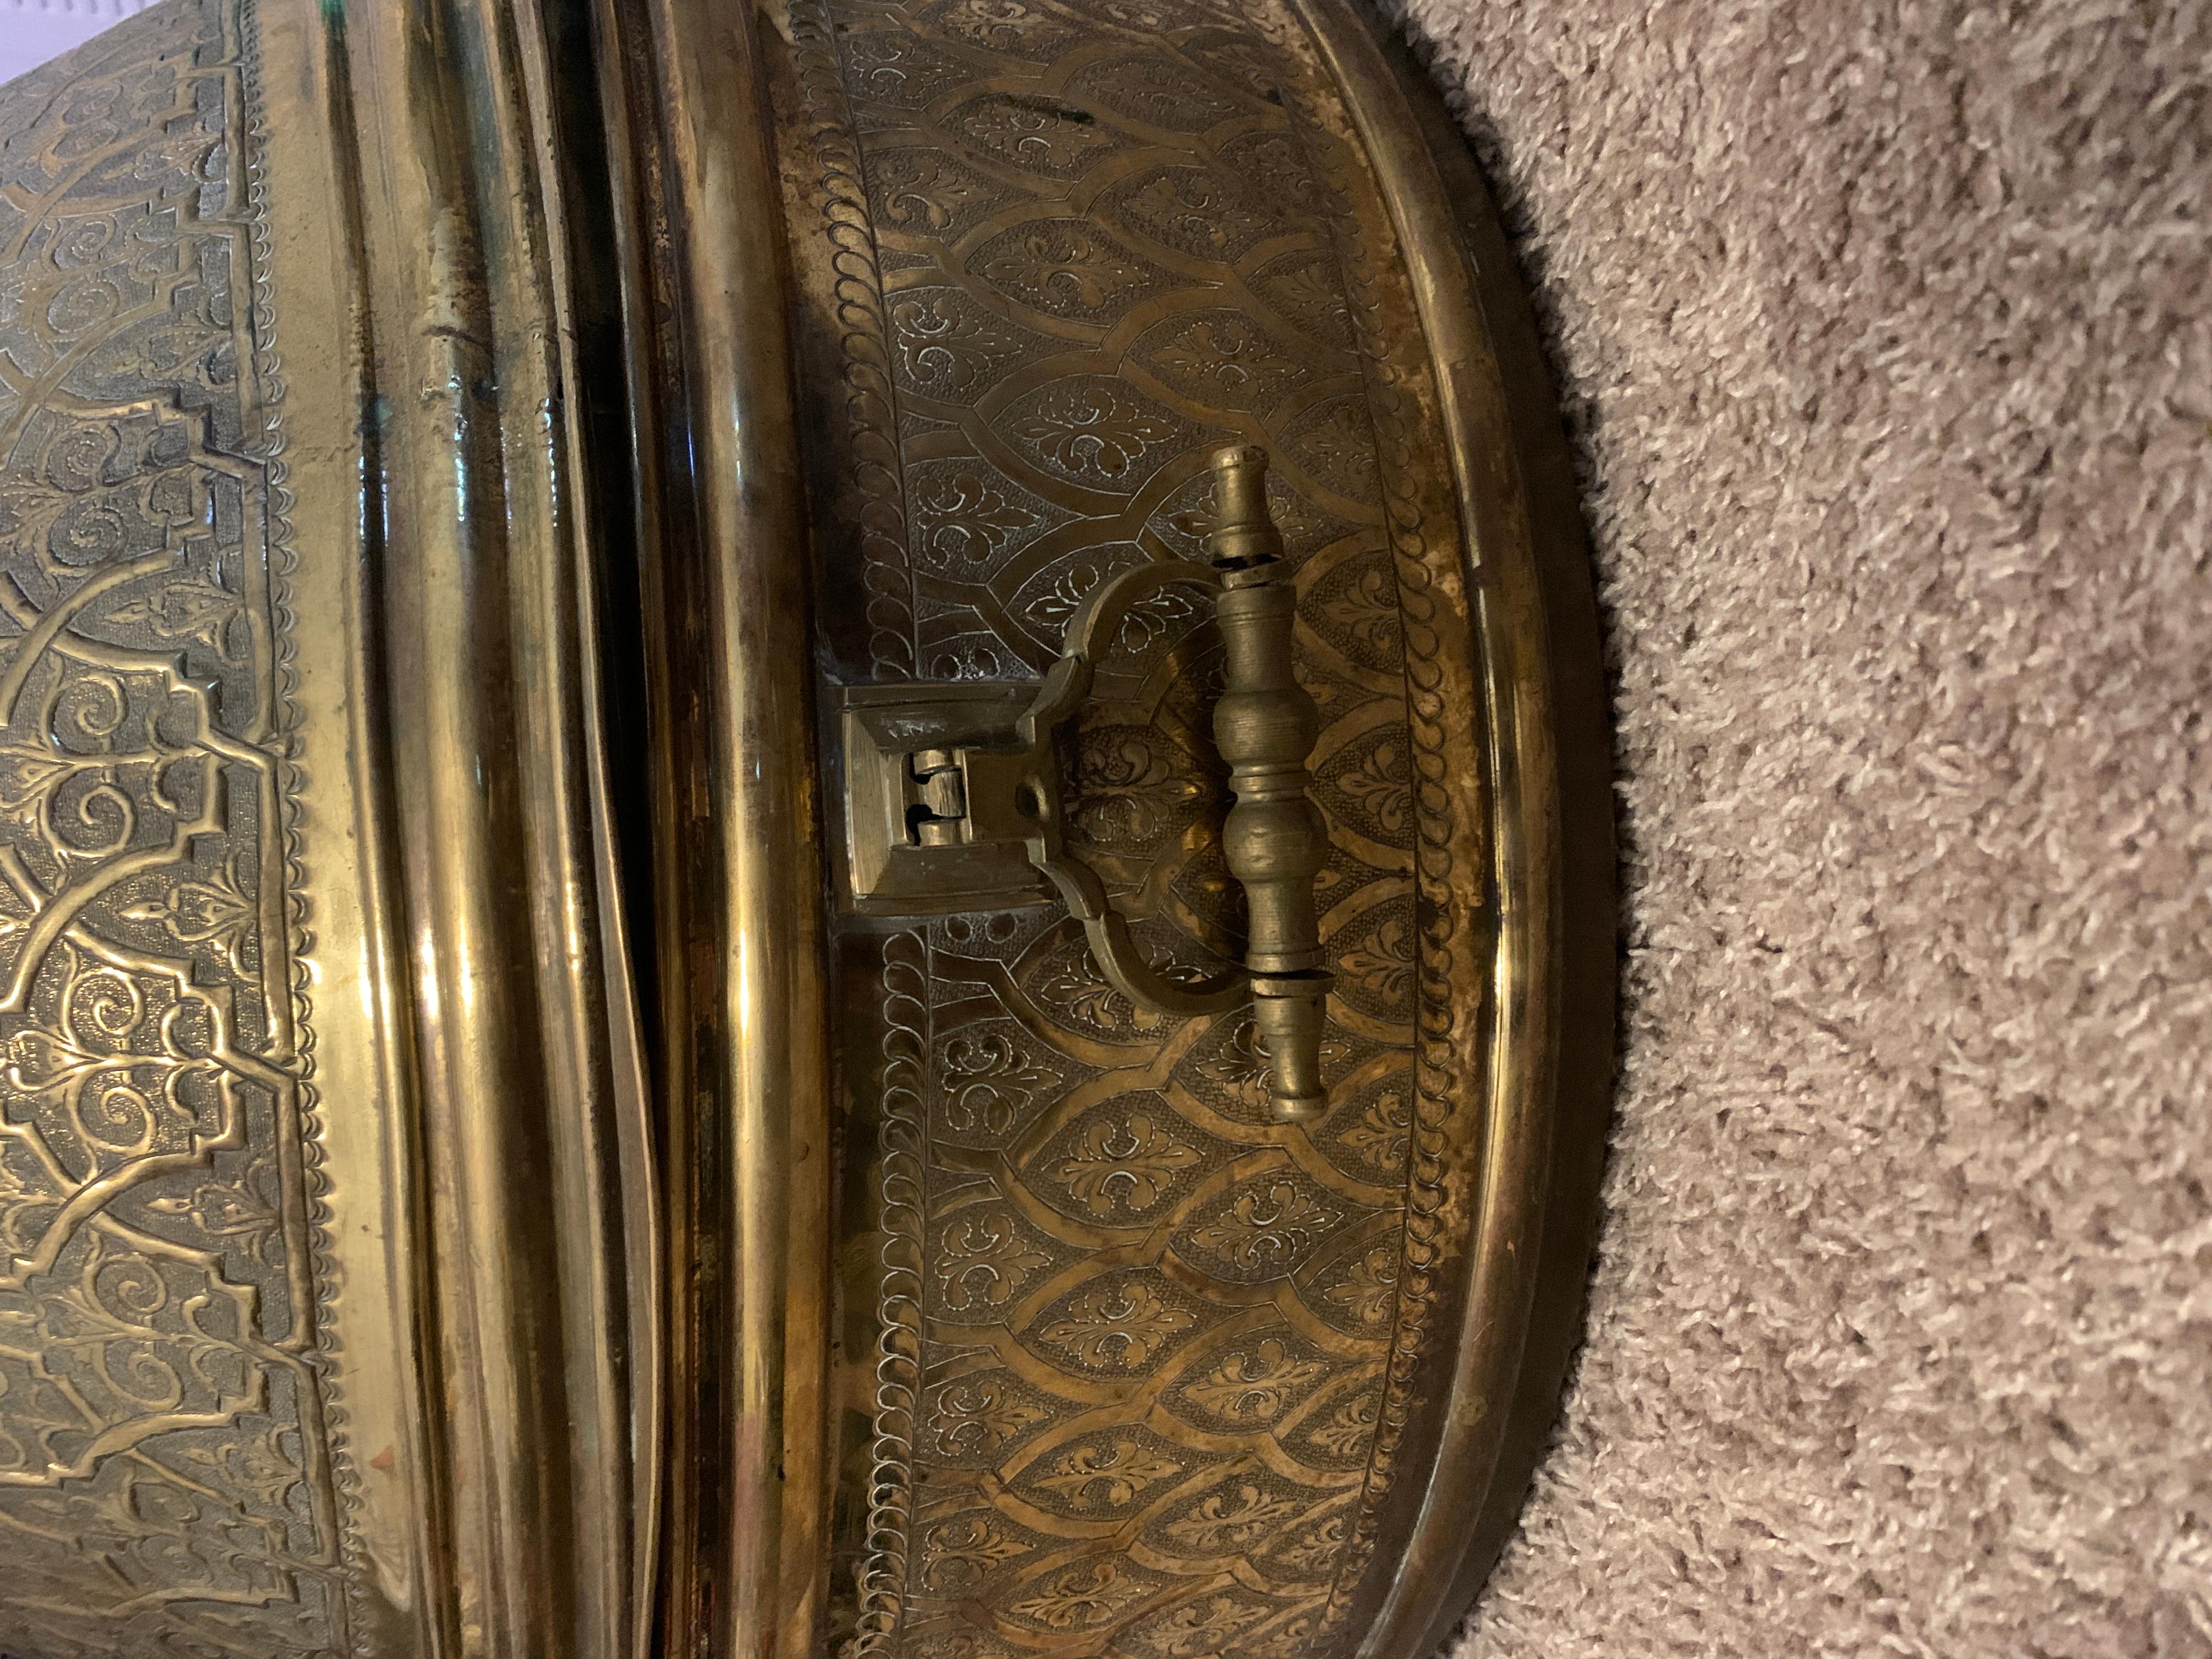 Large handcrafted brass tagine with cone cover and a brass final. Beautiful decorative hand beaten Ottoman designs across its surface. Measure: 3ft.

The history of tagine dates back to the time of Harun al-Rashid, the fifth Abbasid Caliph. The